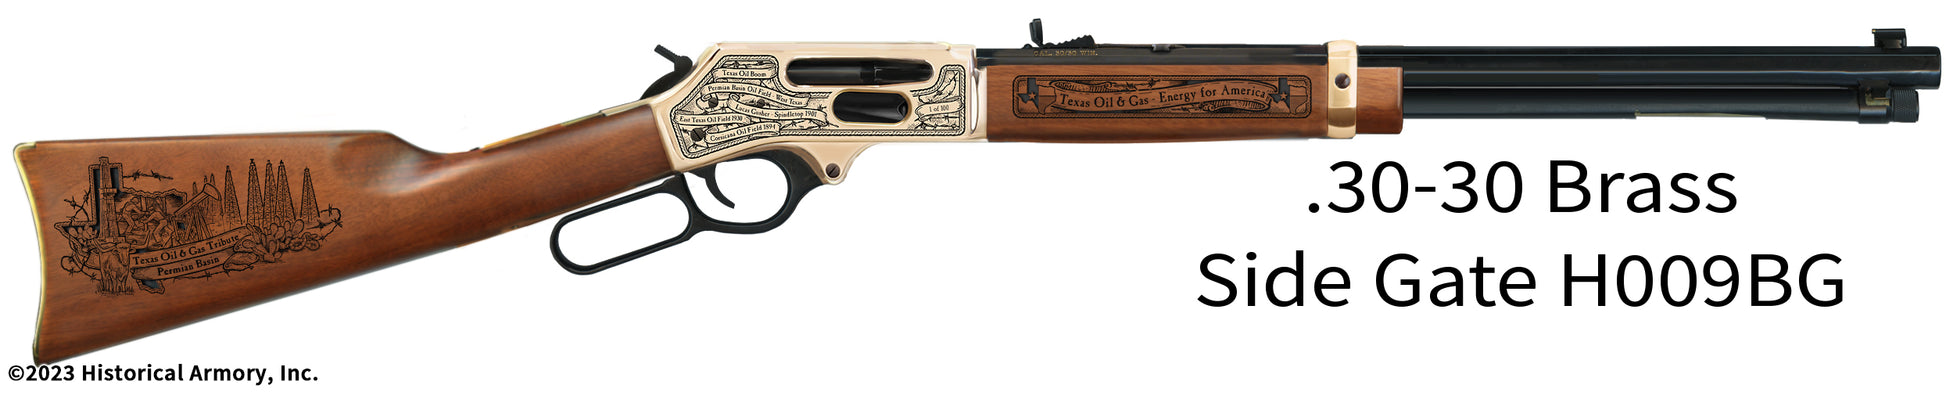 Texas State Oil & Gas Tribute Limited Edition Henry .30-30 Brass Side Gate Engraved Rifle